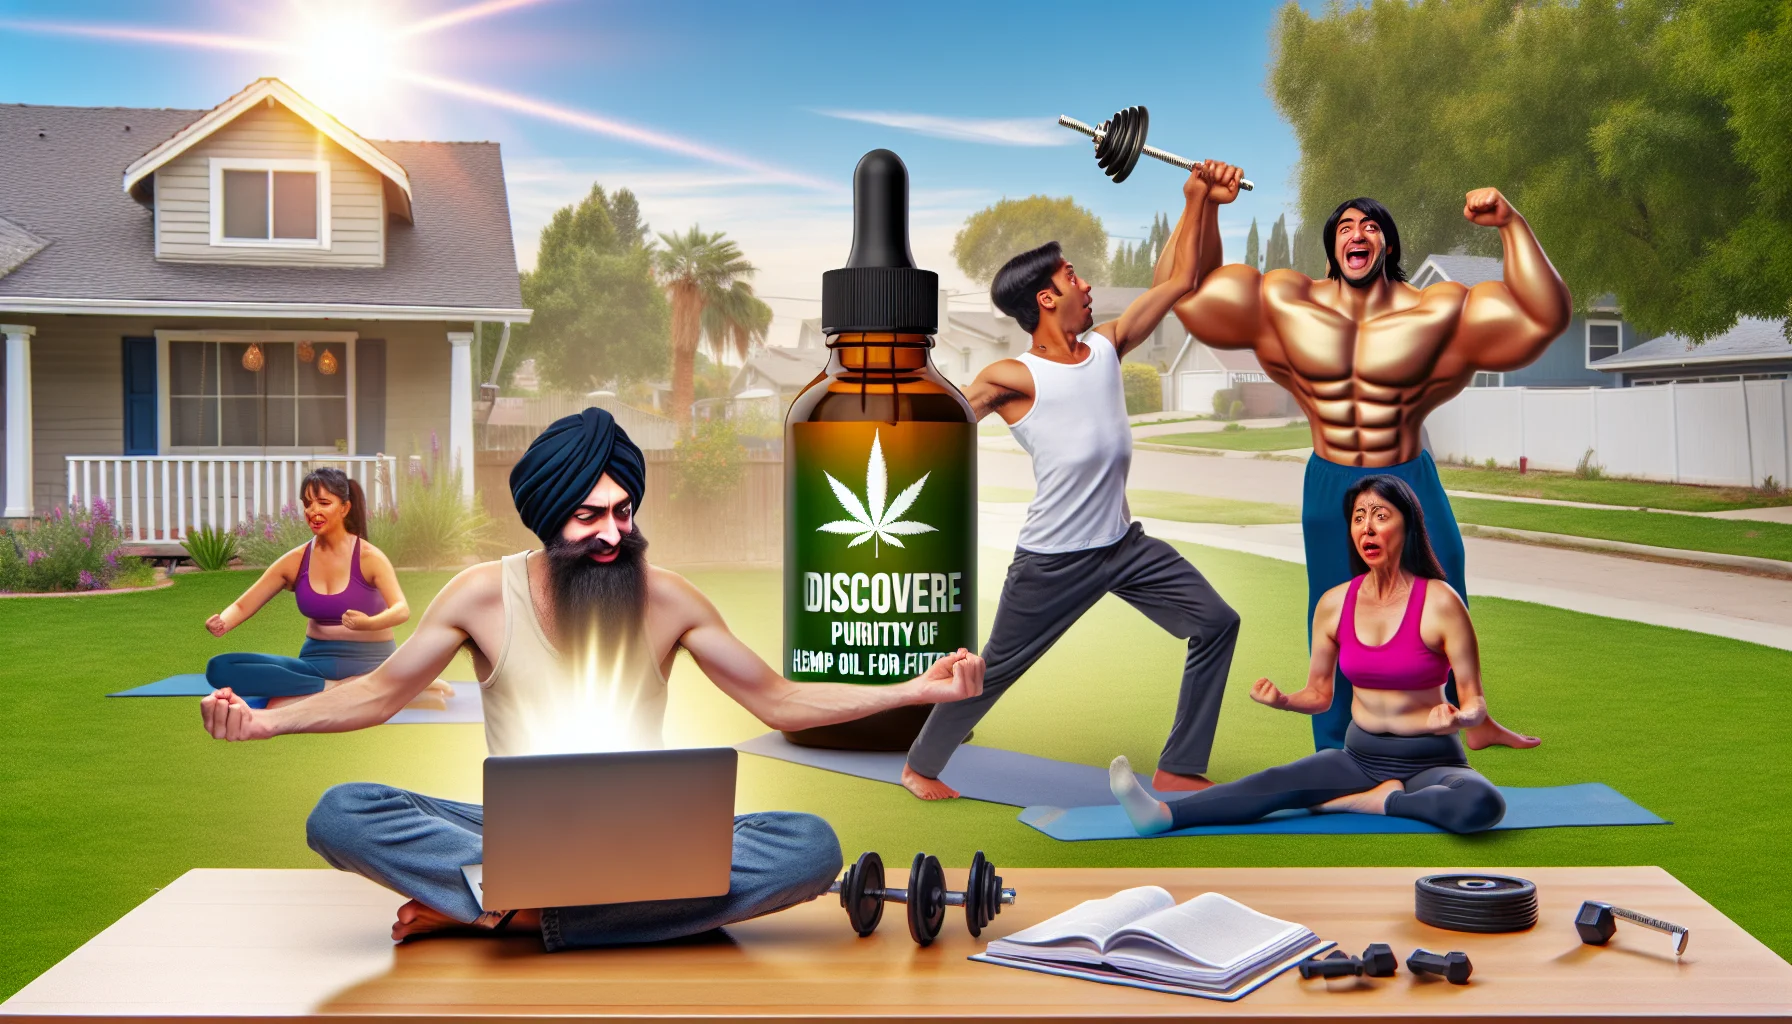 Generate a humorous scene promoting the use of Hemp Oil for fitness. Picture a suburban setting with a group of individuals participating in various fitness activities. One person, a Middle-Eastern woman, is doing yoga in the park, with an exaggeratedly serene expression on her face. Another, a Black man, is lifting weights and showing off an impossibly huge bicep. A South Asian woman is humorously attempting to follow a complex aerobics routine on a laptop screen. All of them have bottles of Hemp Oil nearby, which are emanating a radiant light to signify purity. Caption the image with: 'Discover the Purity of Hemp Oil for Fitness!'